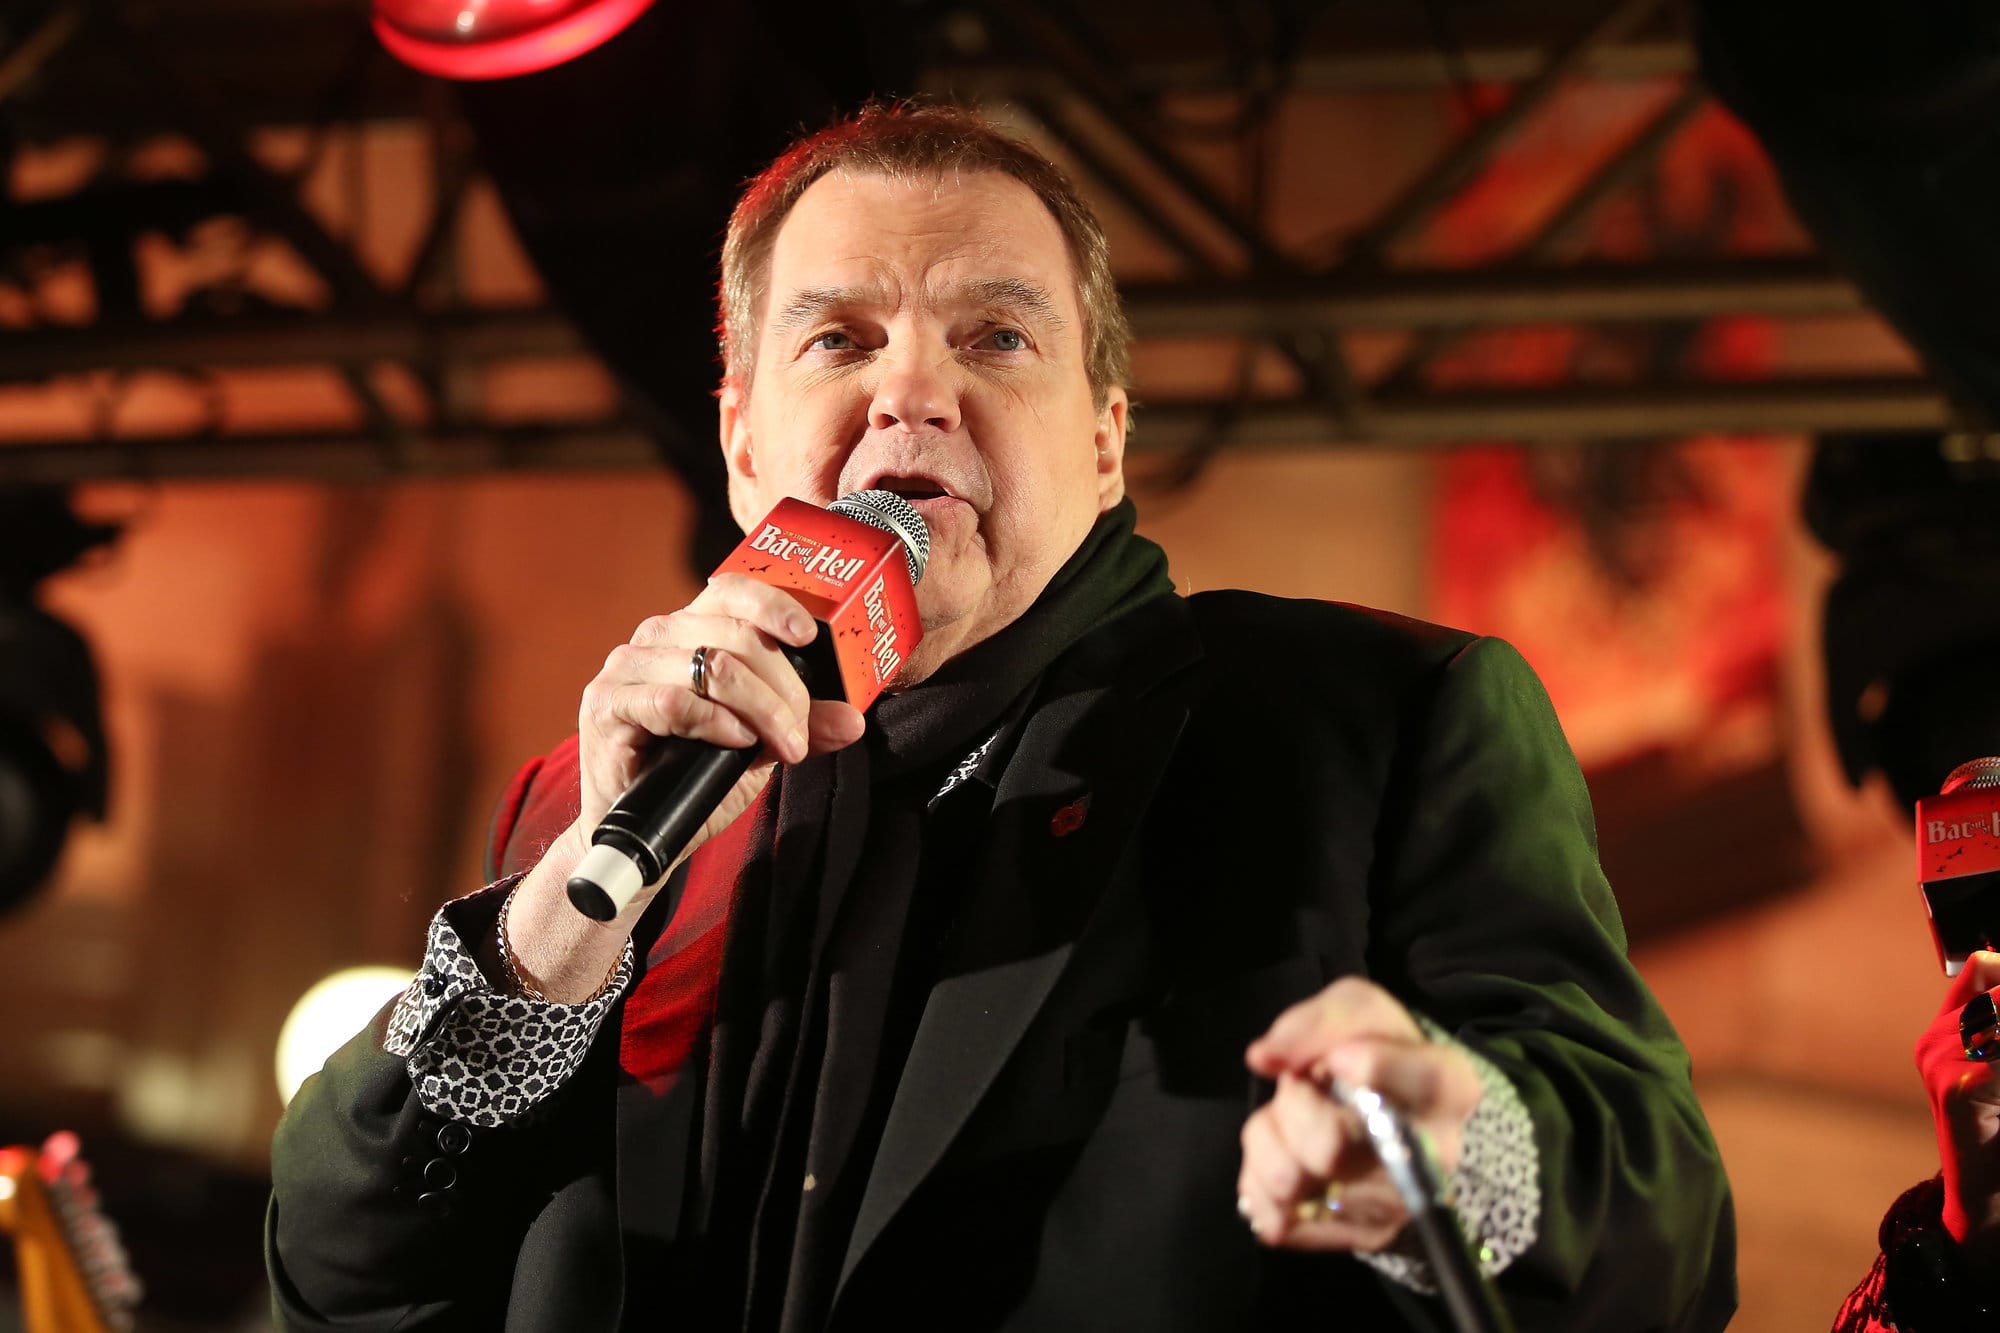 Meat Loaf: Bat Out Of Hell singer dies at 74